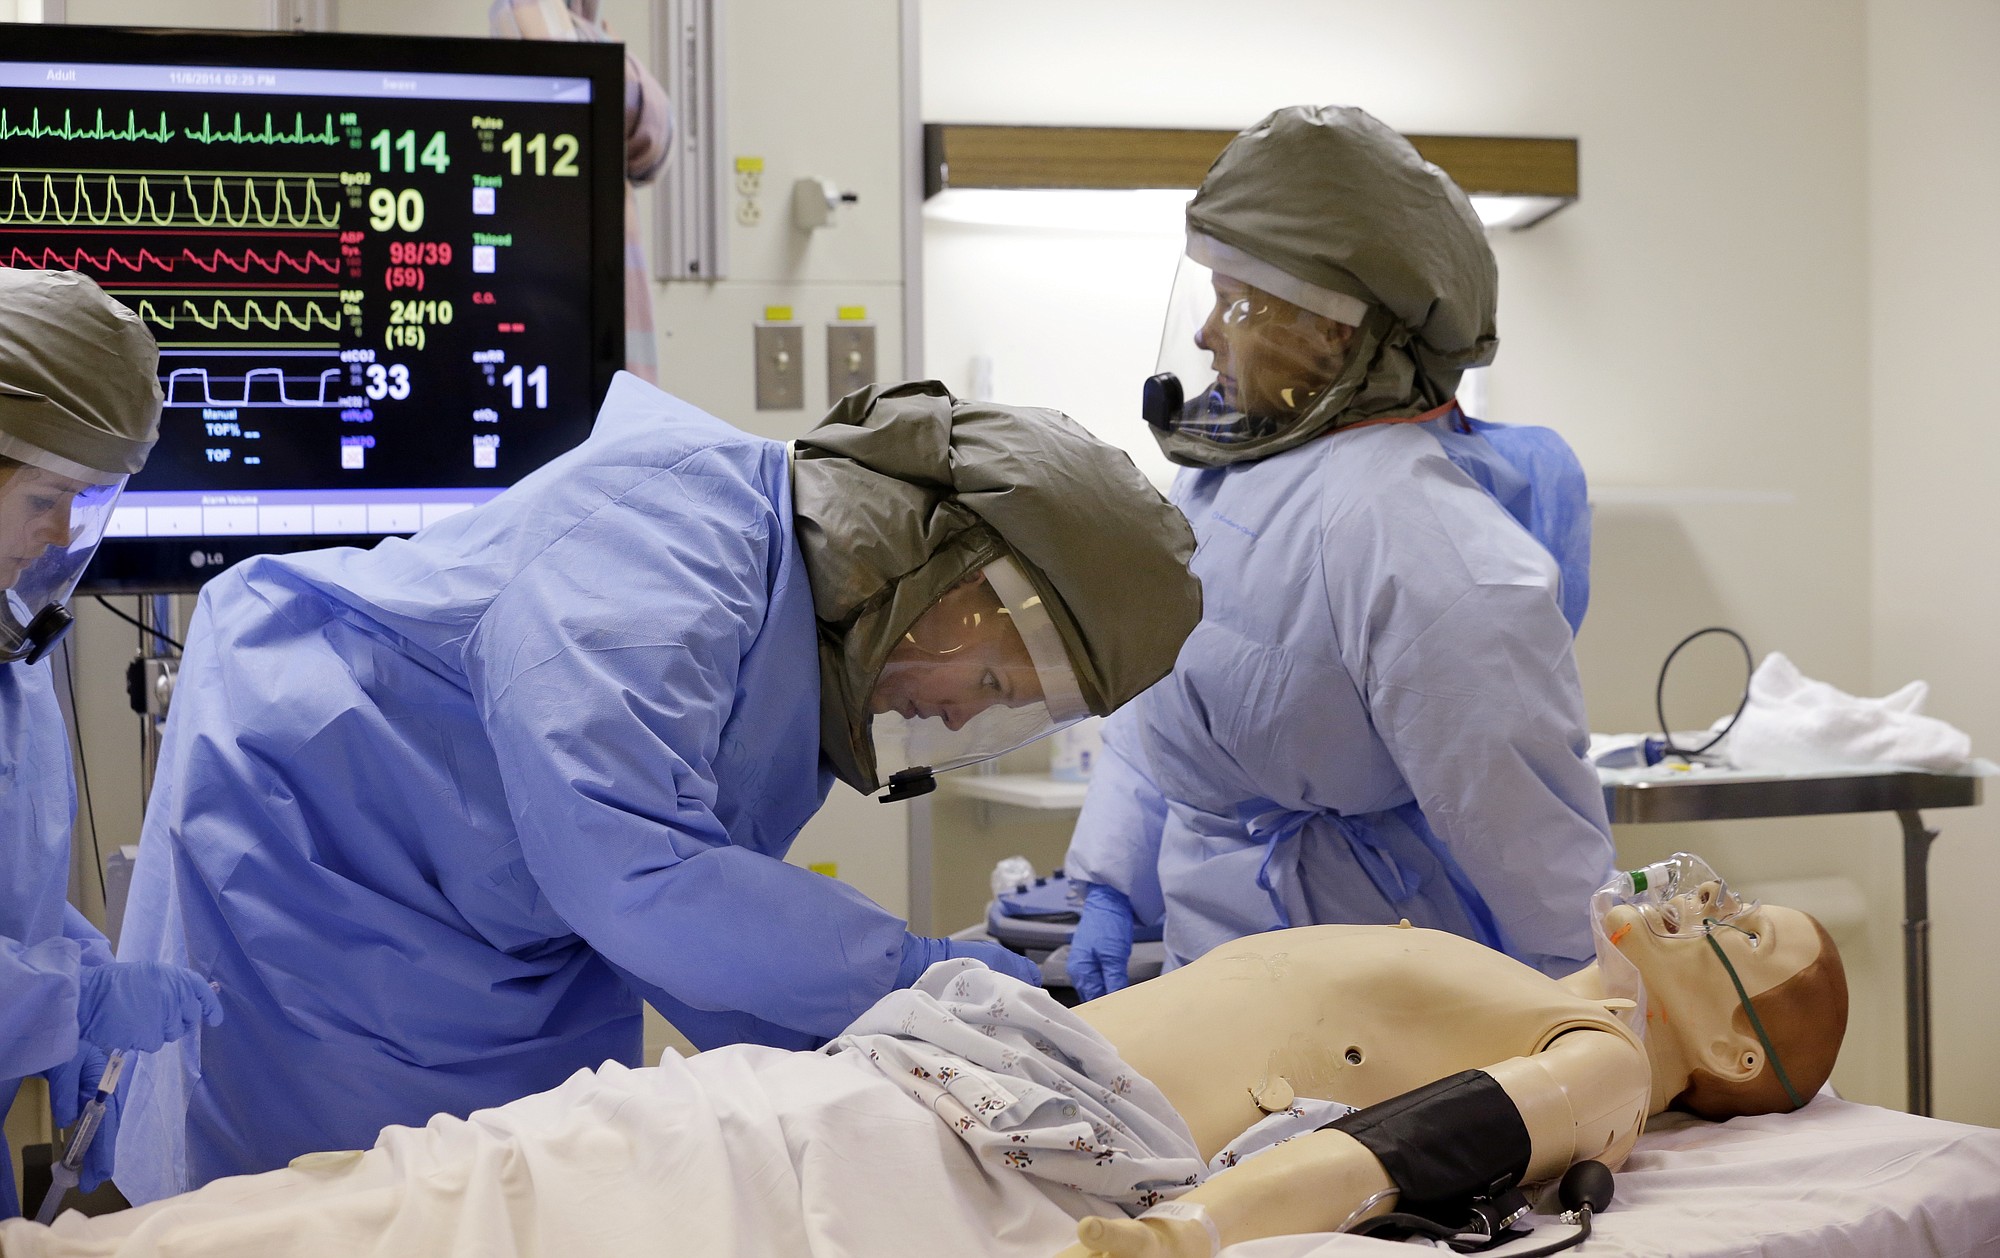 Medical workers wearing protective equipment surround and monitor a simulated patient Thursday during a demonstration for media members on their training for working with possible Ebola patients at Madigan Army Medical Center on Joint Base Lewis McChord, near Tacoma. Madigan providers and nurses have been training to perform clinical skills, including inserting IVs, obtaining blood samples for testing and conducting ultrasounds while dressed in powered air purifying respirators, impermeable suits and multiple layers of gloves. The clinically focused exercises use realistic patient simulators that speak through microphones and can express simulated bodily fluids.